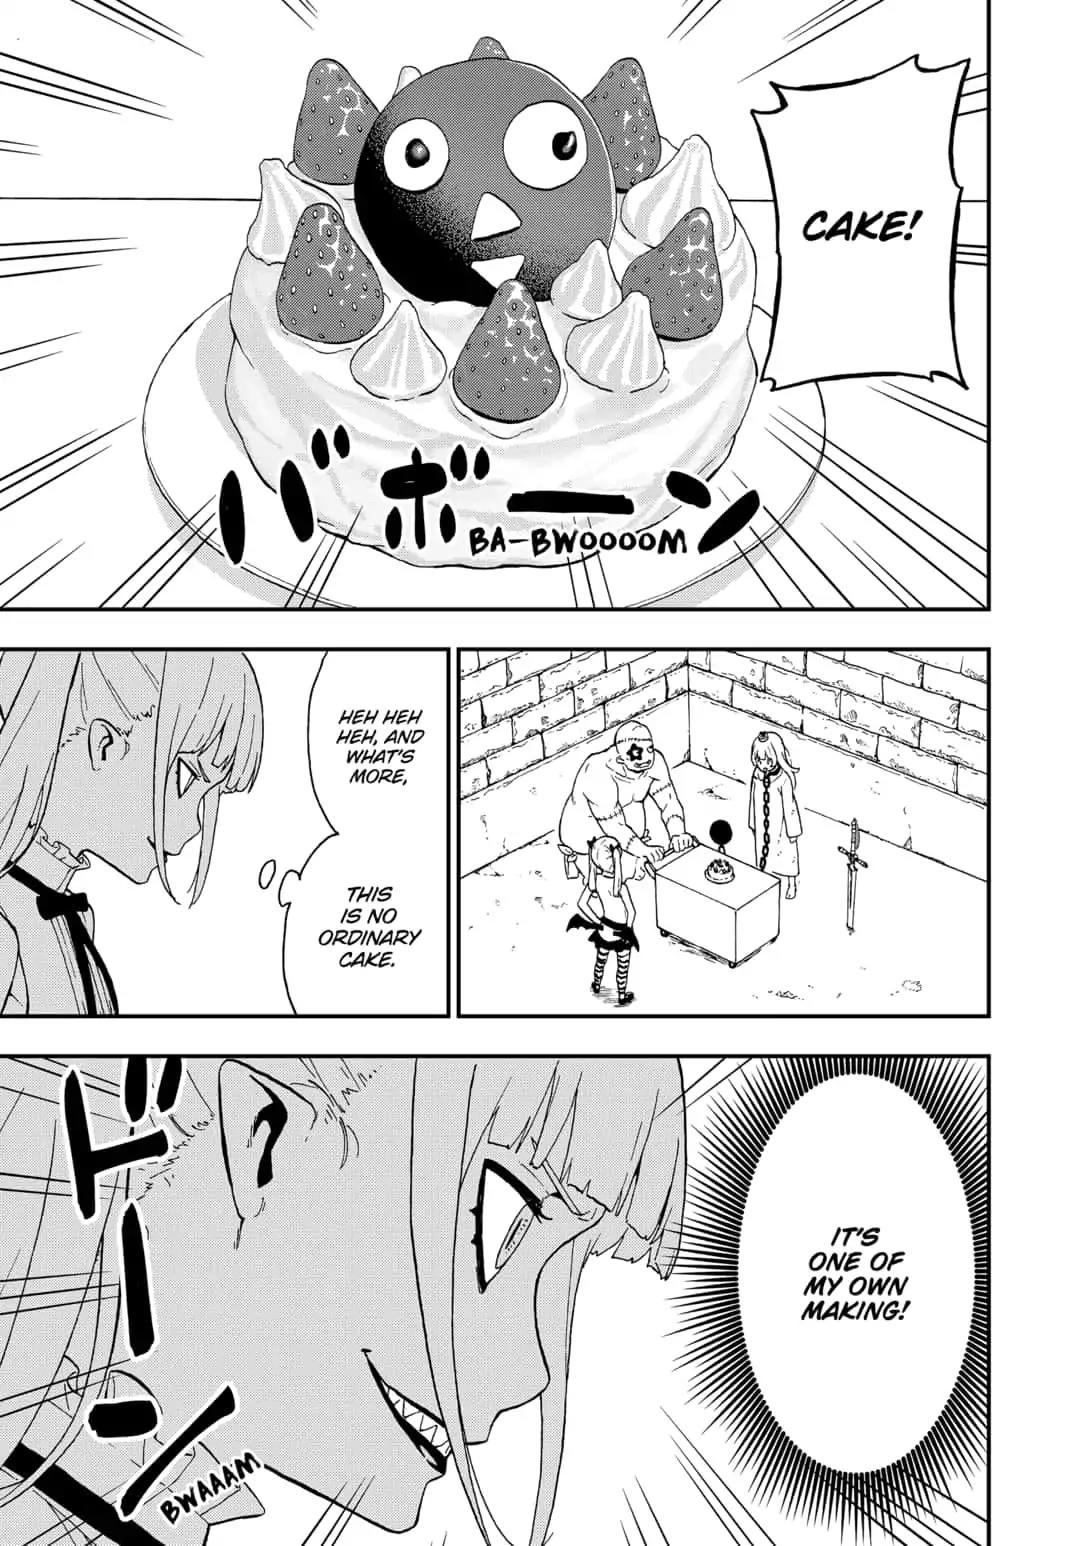 It's Time for "Interrogation", Princess! - chapter 45 - #3